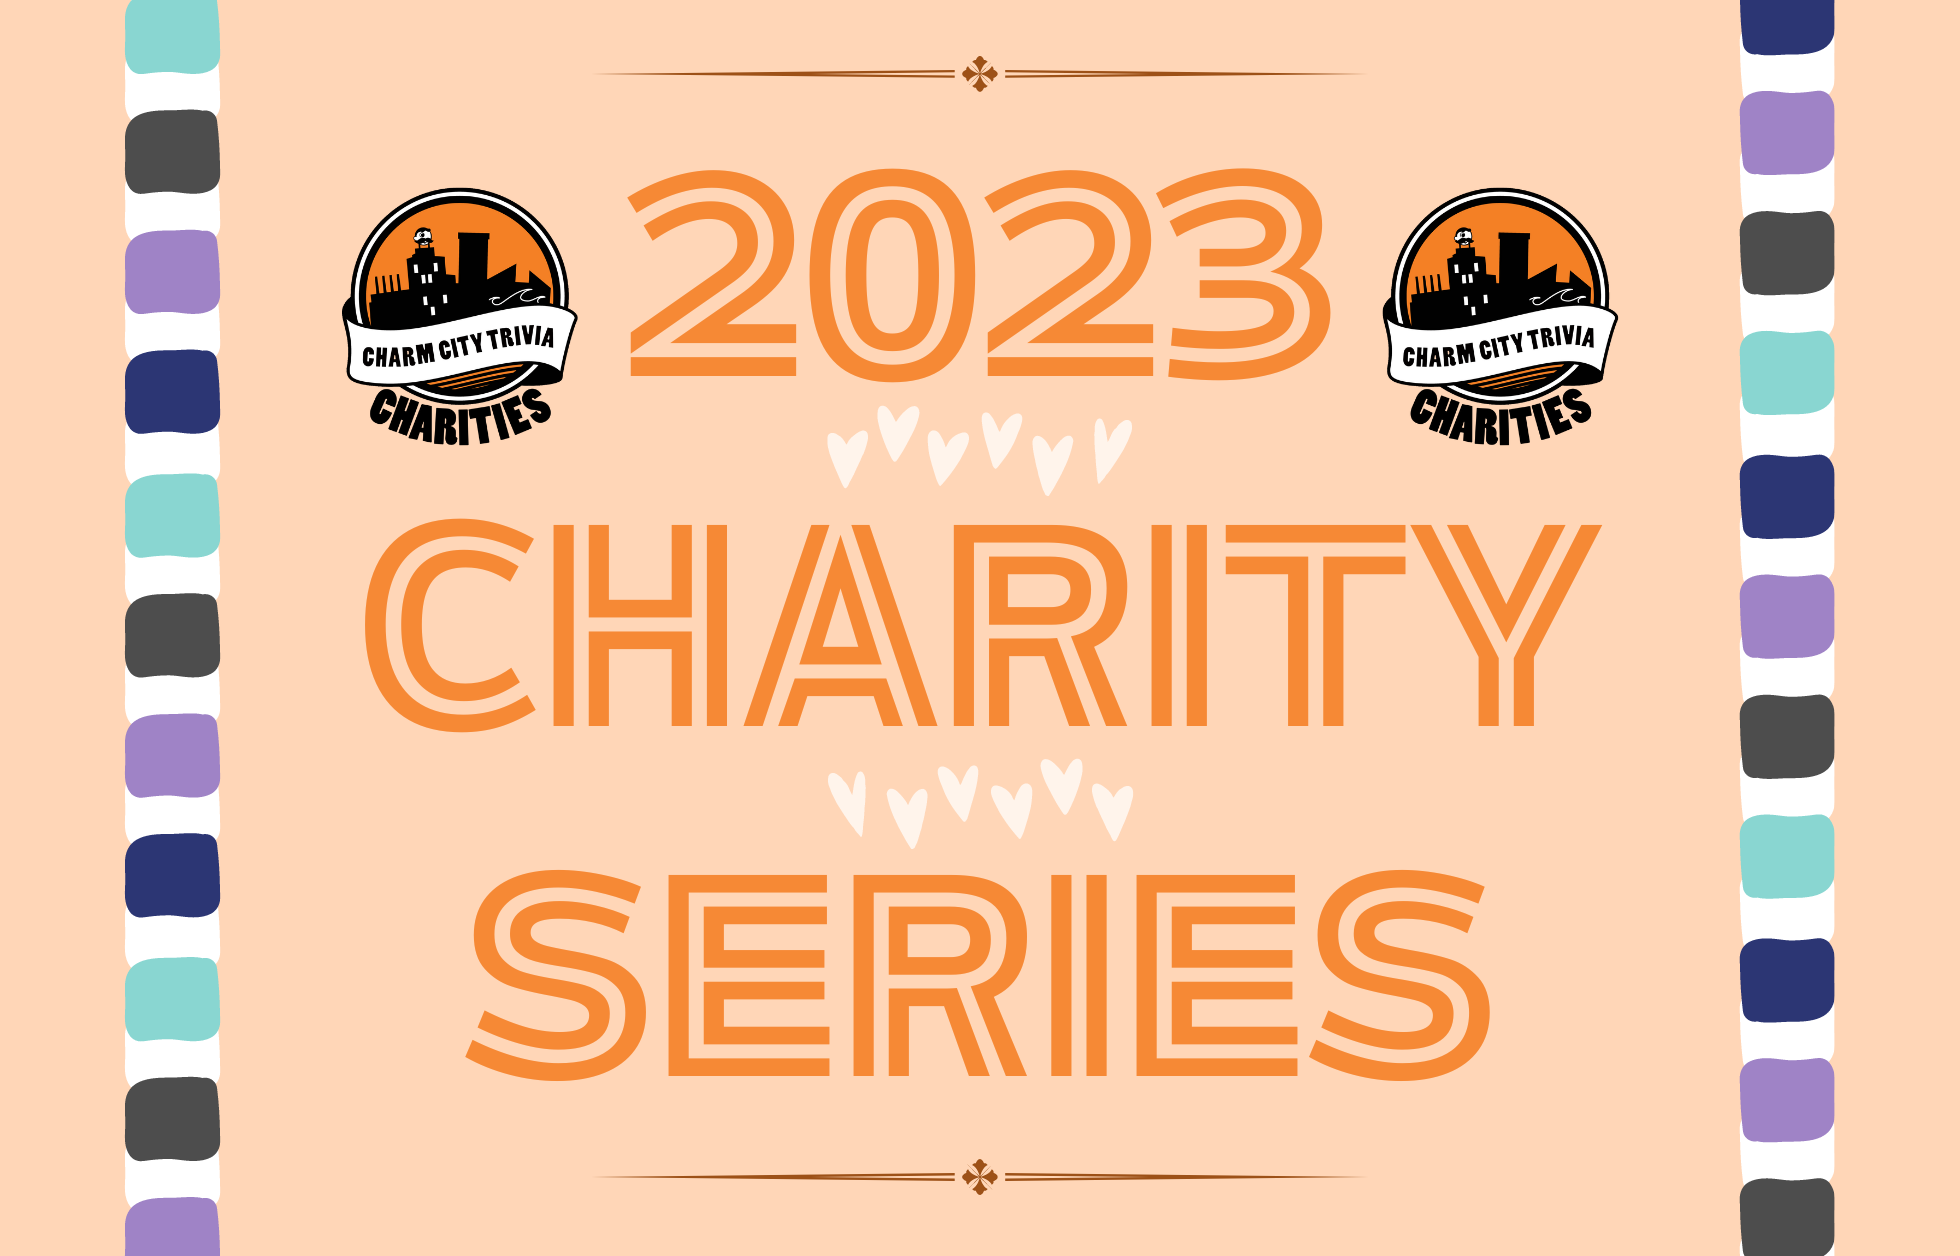 a light orange background with a colorful border, two Charm City Trivia Charities logos, dark orange lines at the top & bottom, and orange text. The text reads: 2023 Charity Series